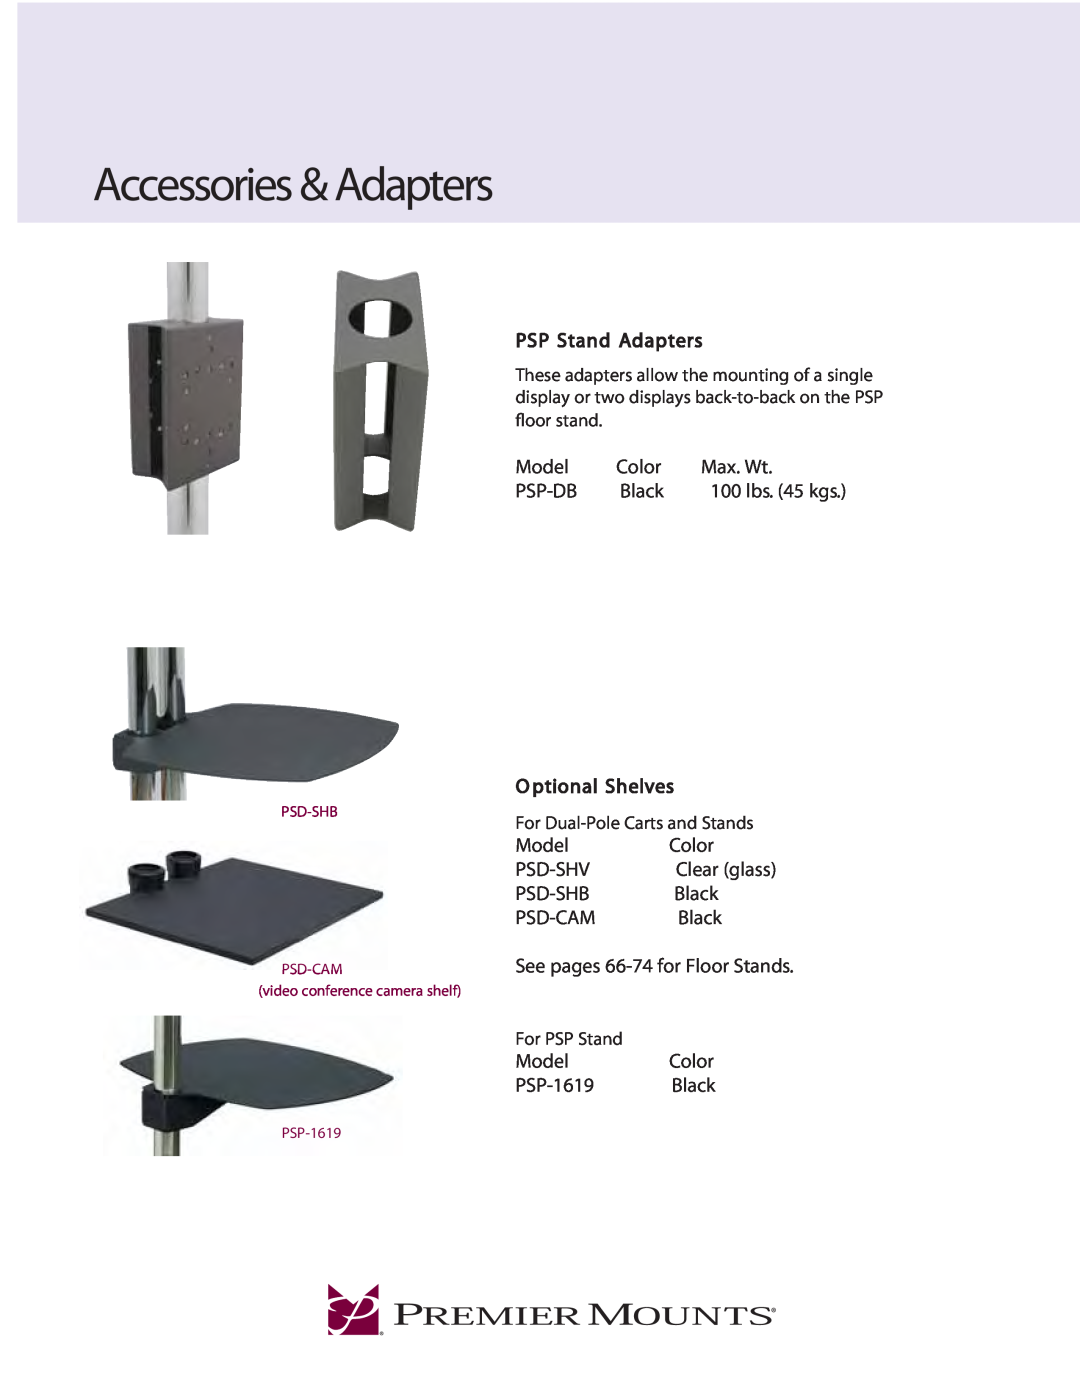 Premier Mounts PSP-DB manual Accessories & Adapters, PSP Stand Adapters, Model, Color, Max. Wt, Psp-Db, Black, Psd-Shv 